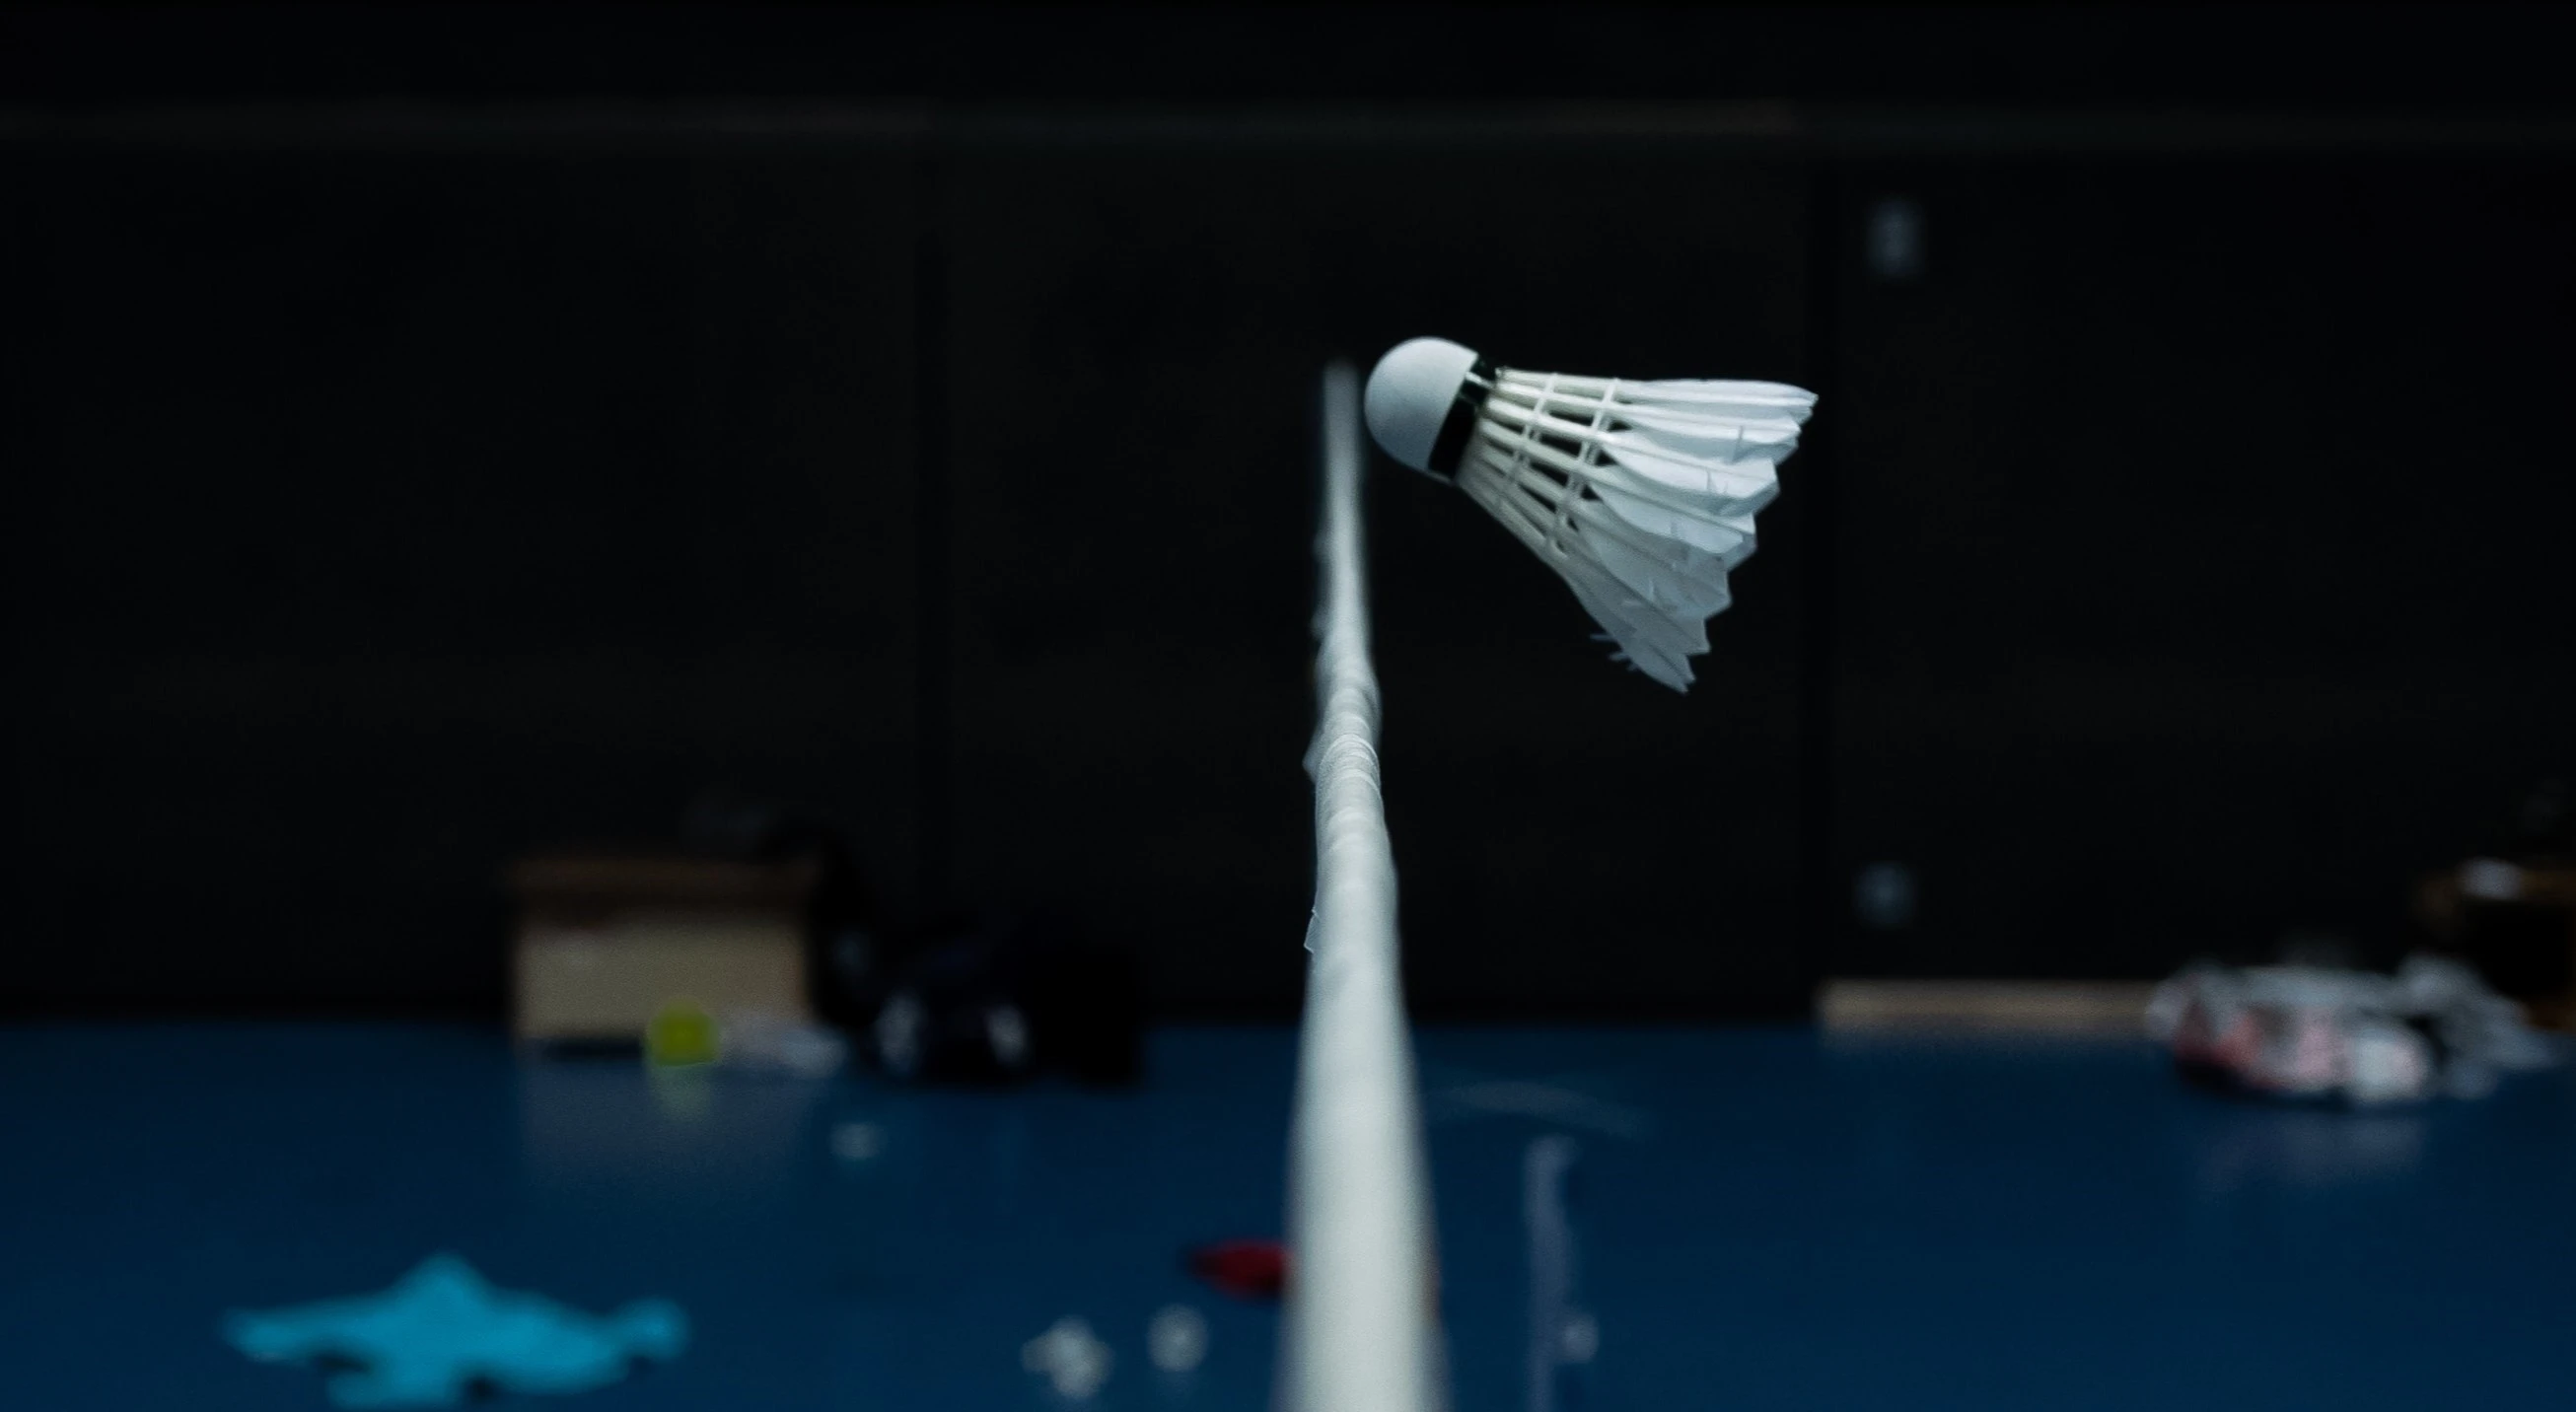 engagesports provide best Badminton court in Dubai: Find the best places to play badminton in Dubai with our comprehensive guide, featuring court locations and facility amenities.